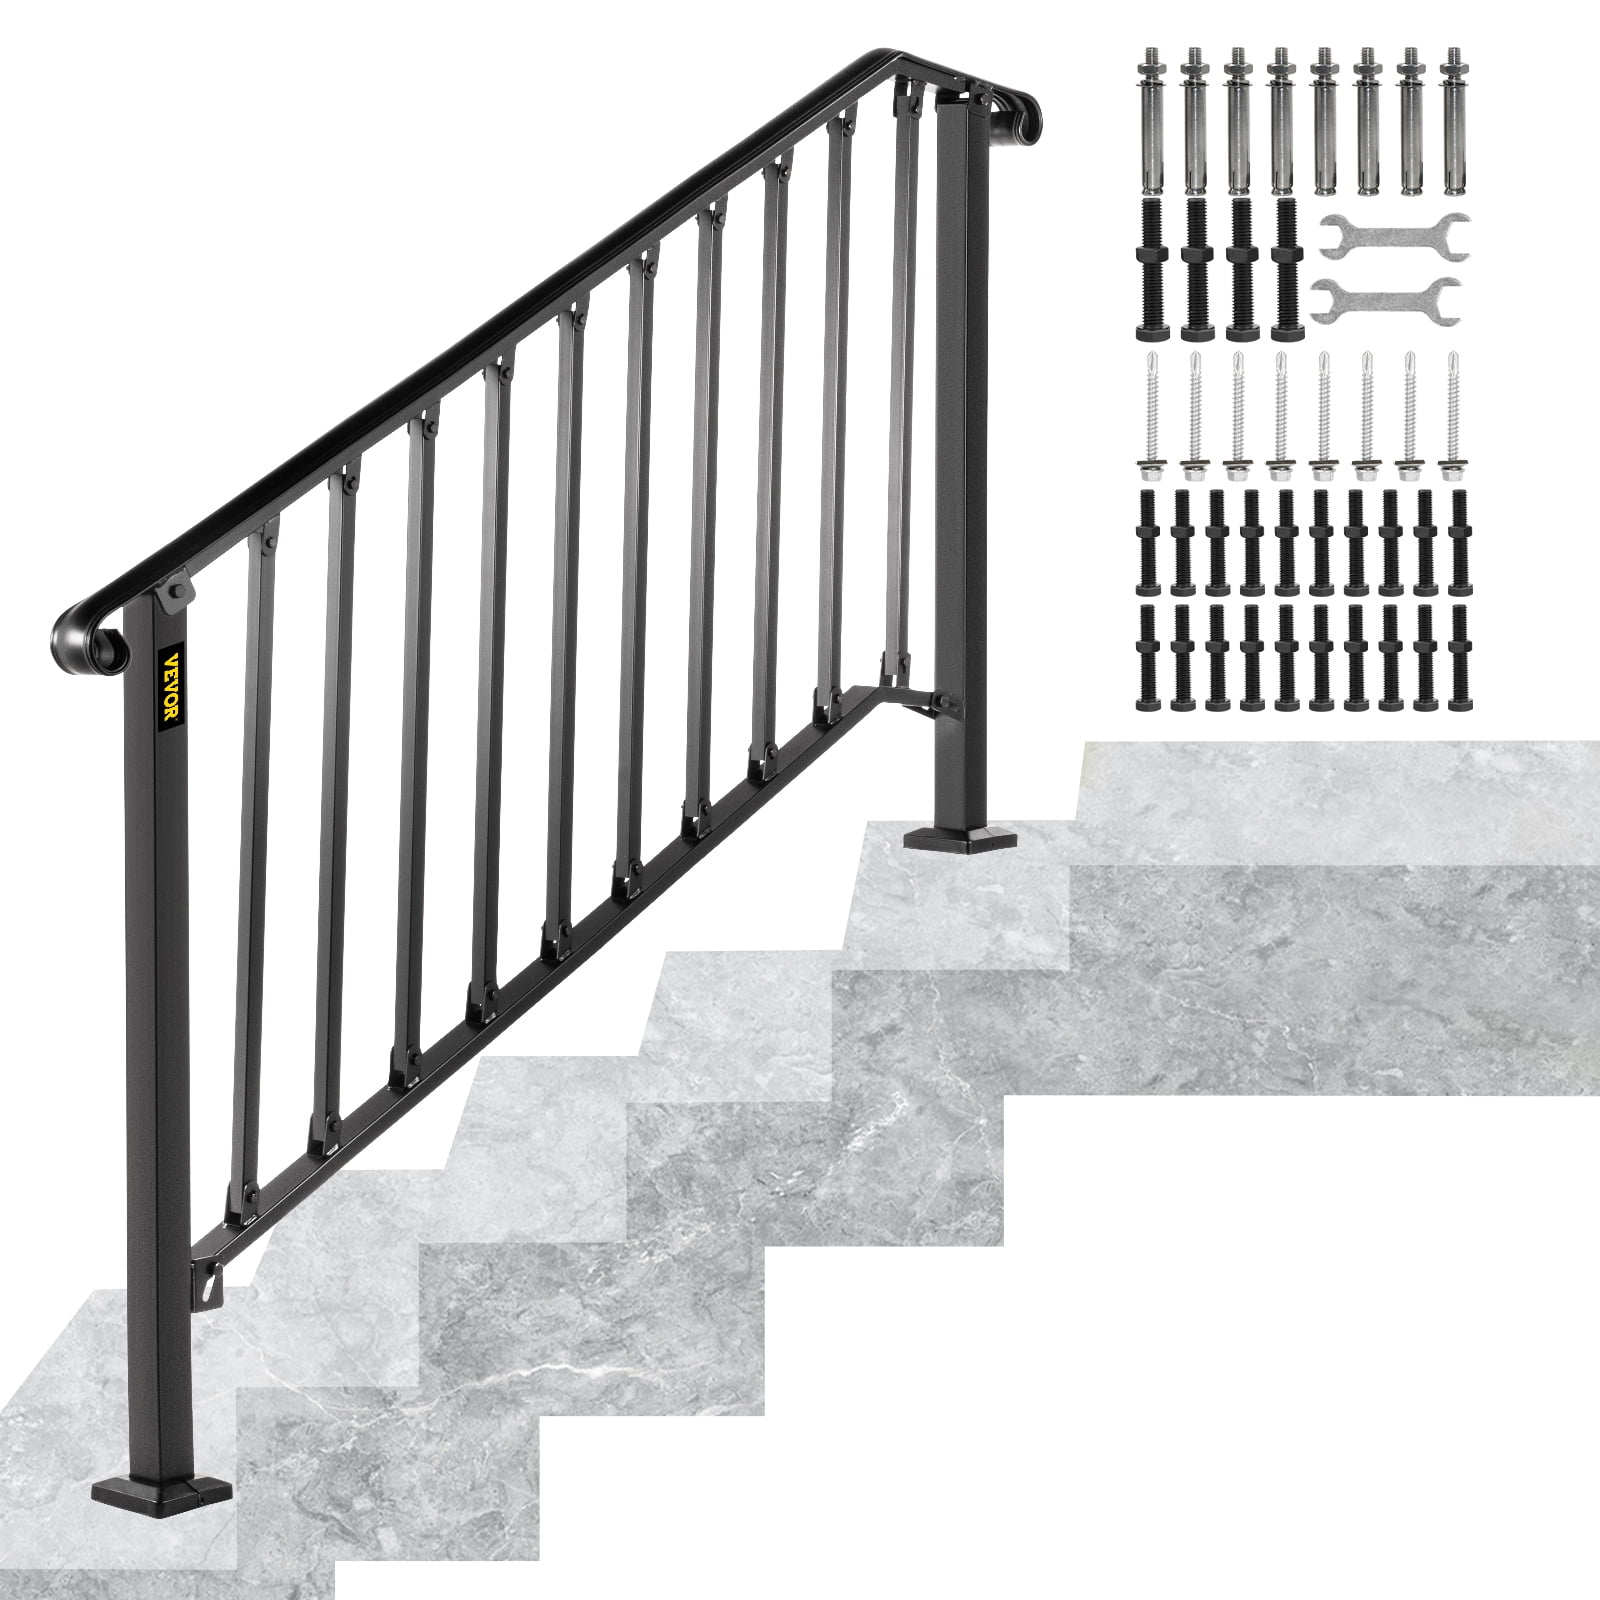 IRON 4' HANDRAILs  WALL GRAB RAILS STAIRCASE RAIL INDOOR OUTDOOR 3-5 STEPS 48" 